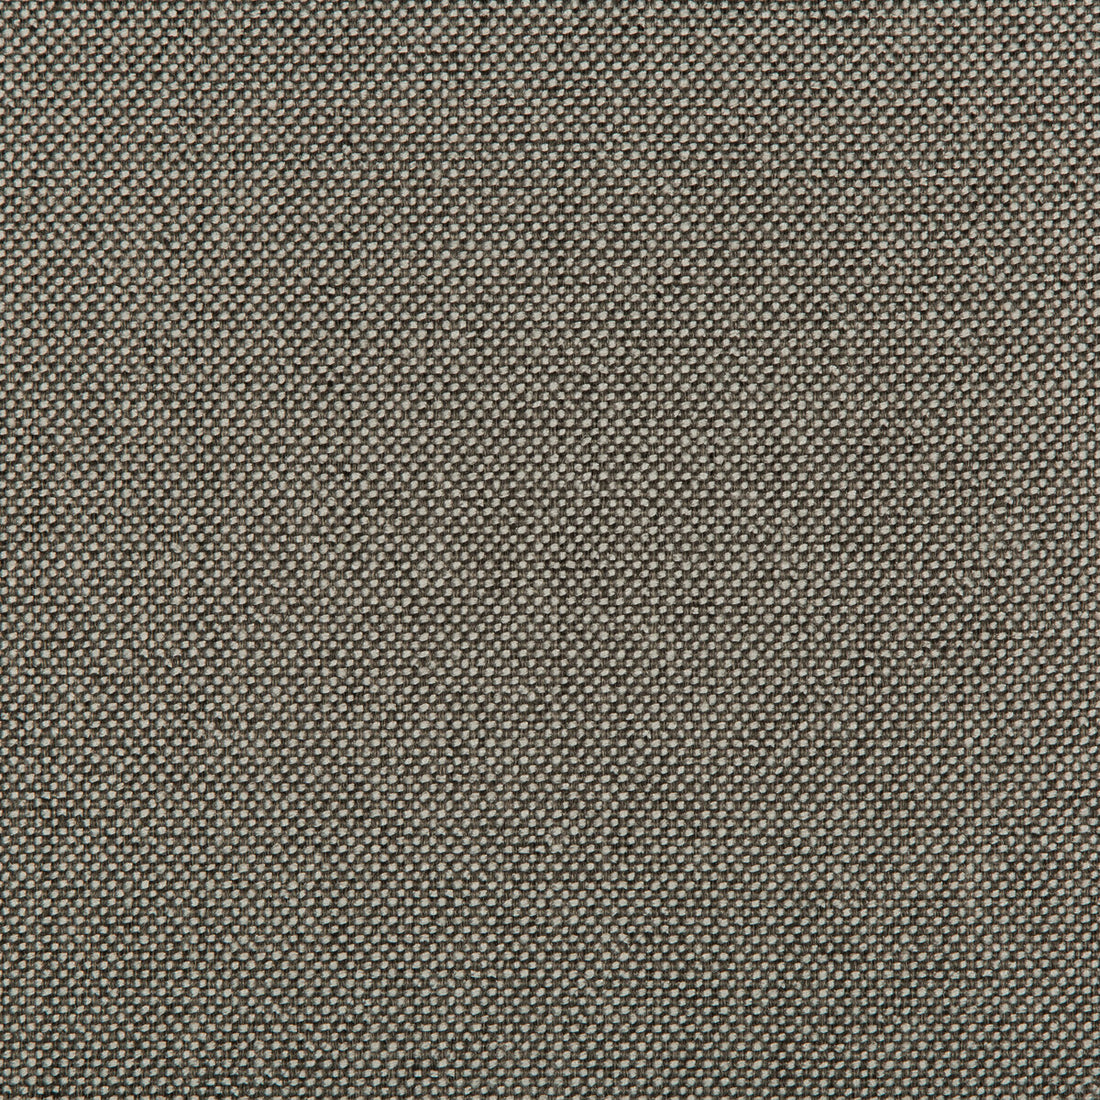 Williams fabric in nickel color - pattern 35744.21.0 - by Kravet Contract in the Value Kravetarmor collection